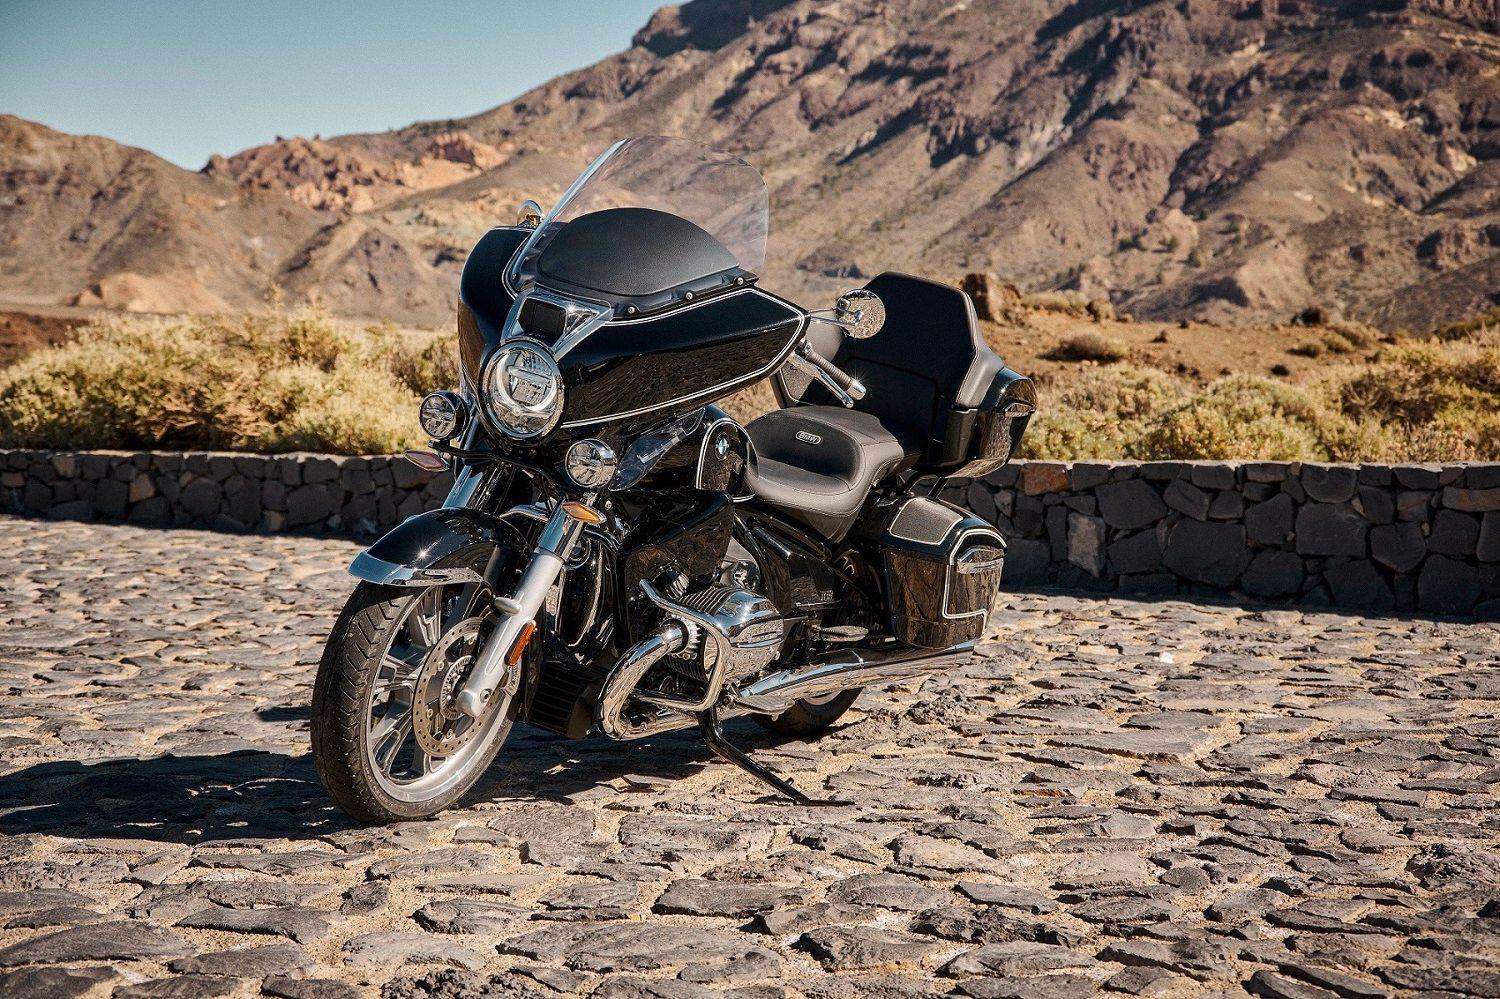 The BMW R 18 Transcontinental comes to India as a completely built unit (CBU). With this, BMW Motorrad now offers three models in the cruiser segment, the other two being R 18 and the R 18 Classic.